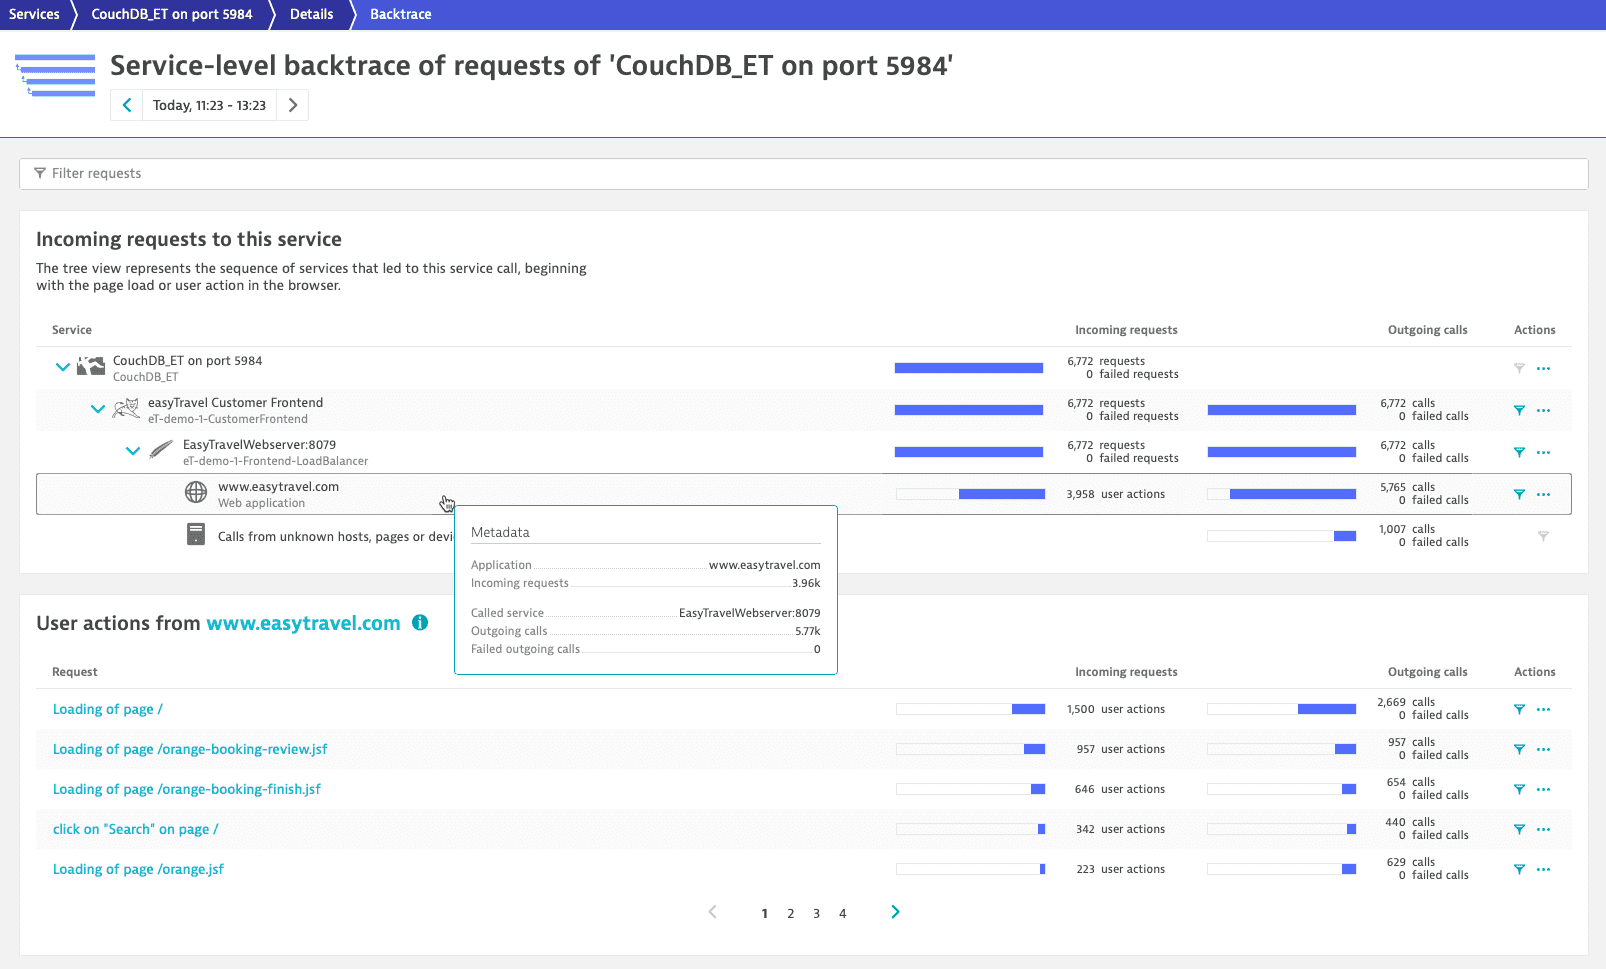 User actions in service-level backtrace